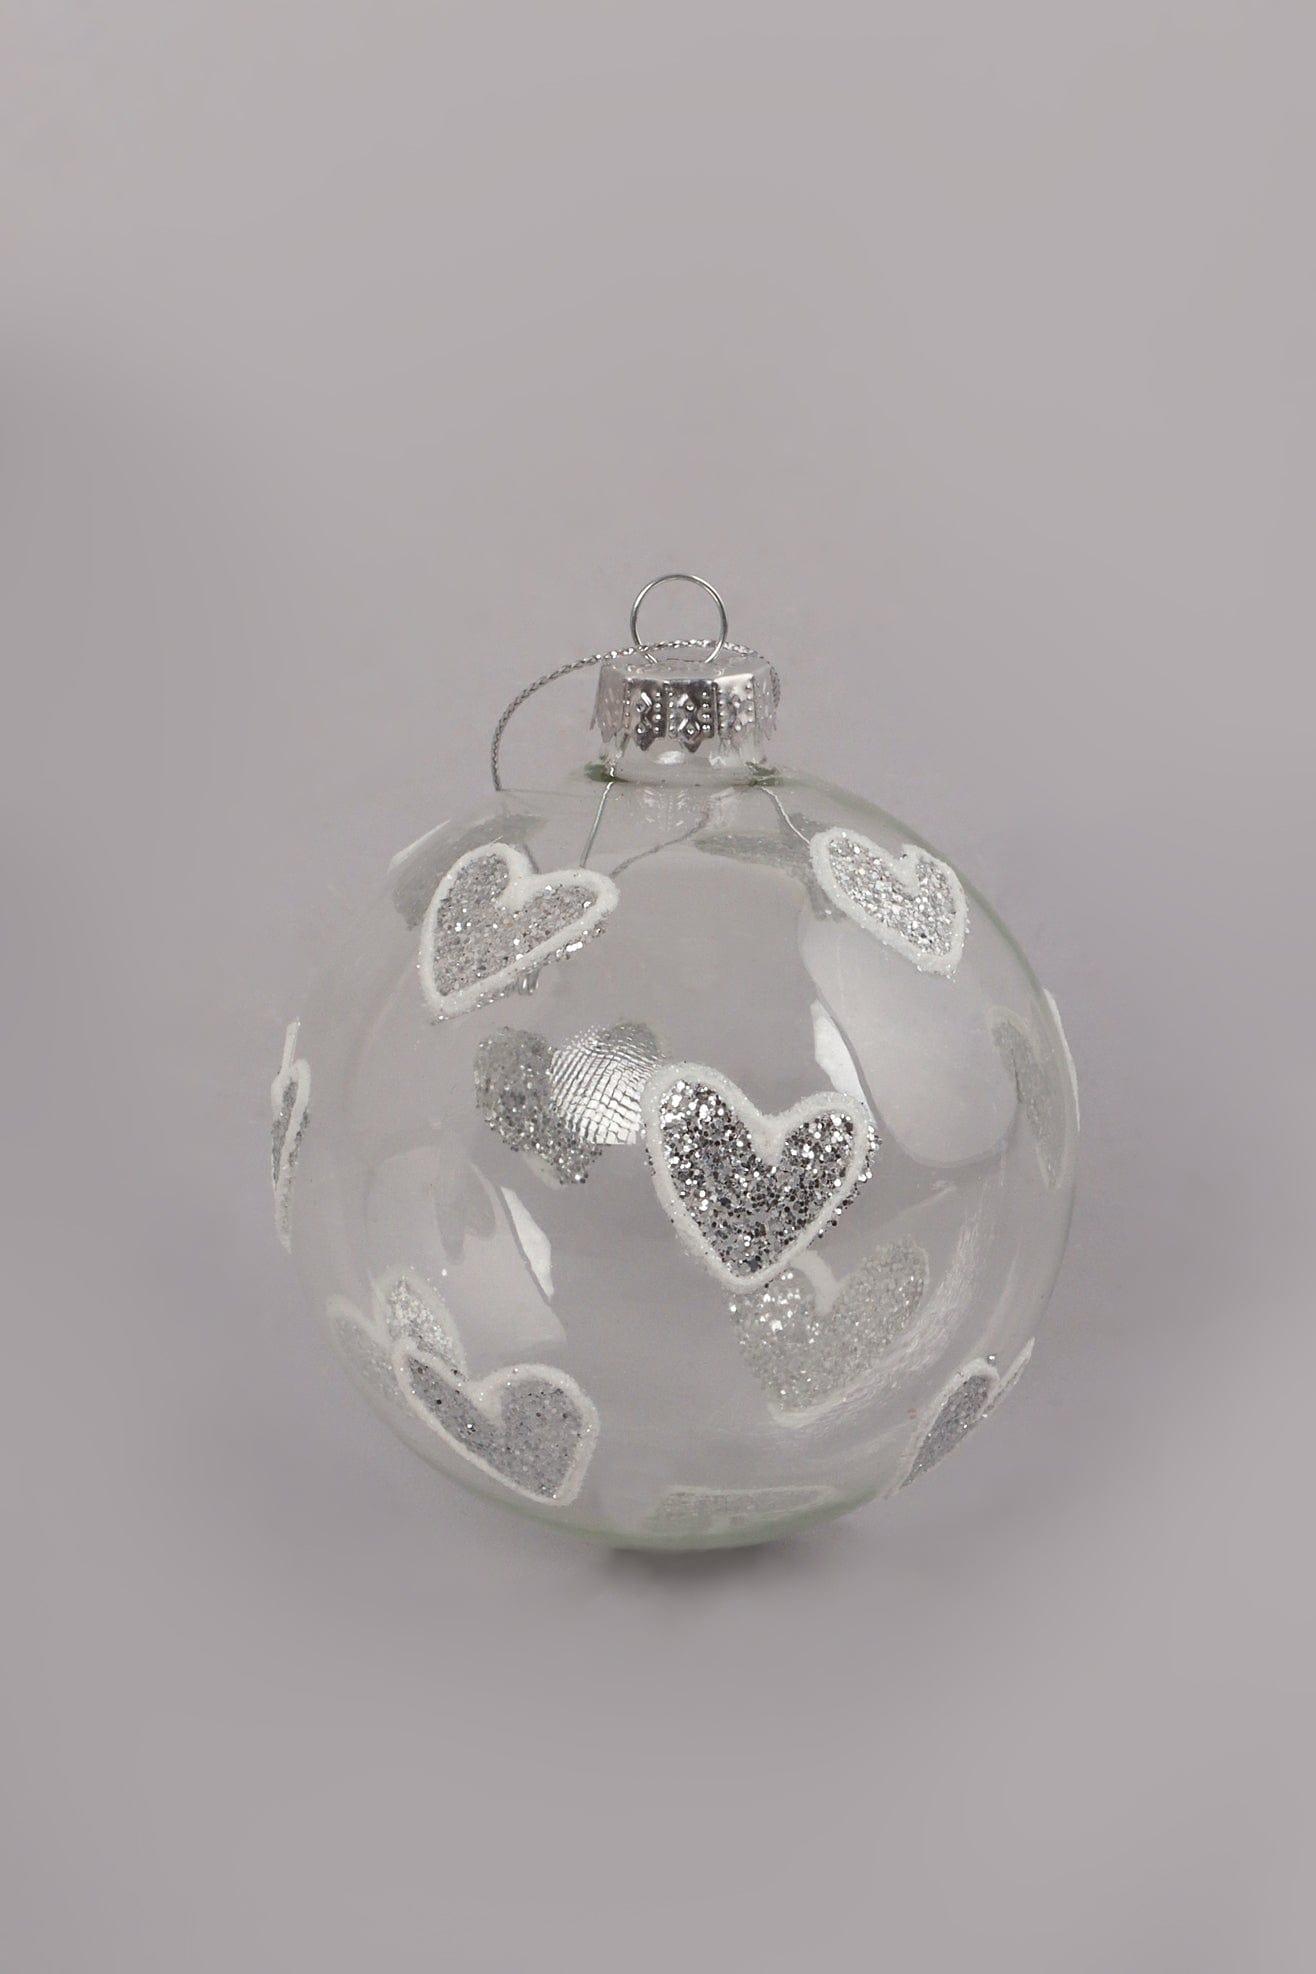 G Decor Christmas Decorations Silver Sparkling Glass Christmas Tree Bauble with Glitter Hearts